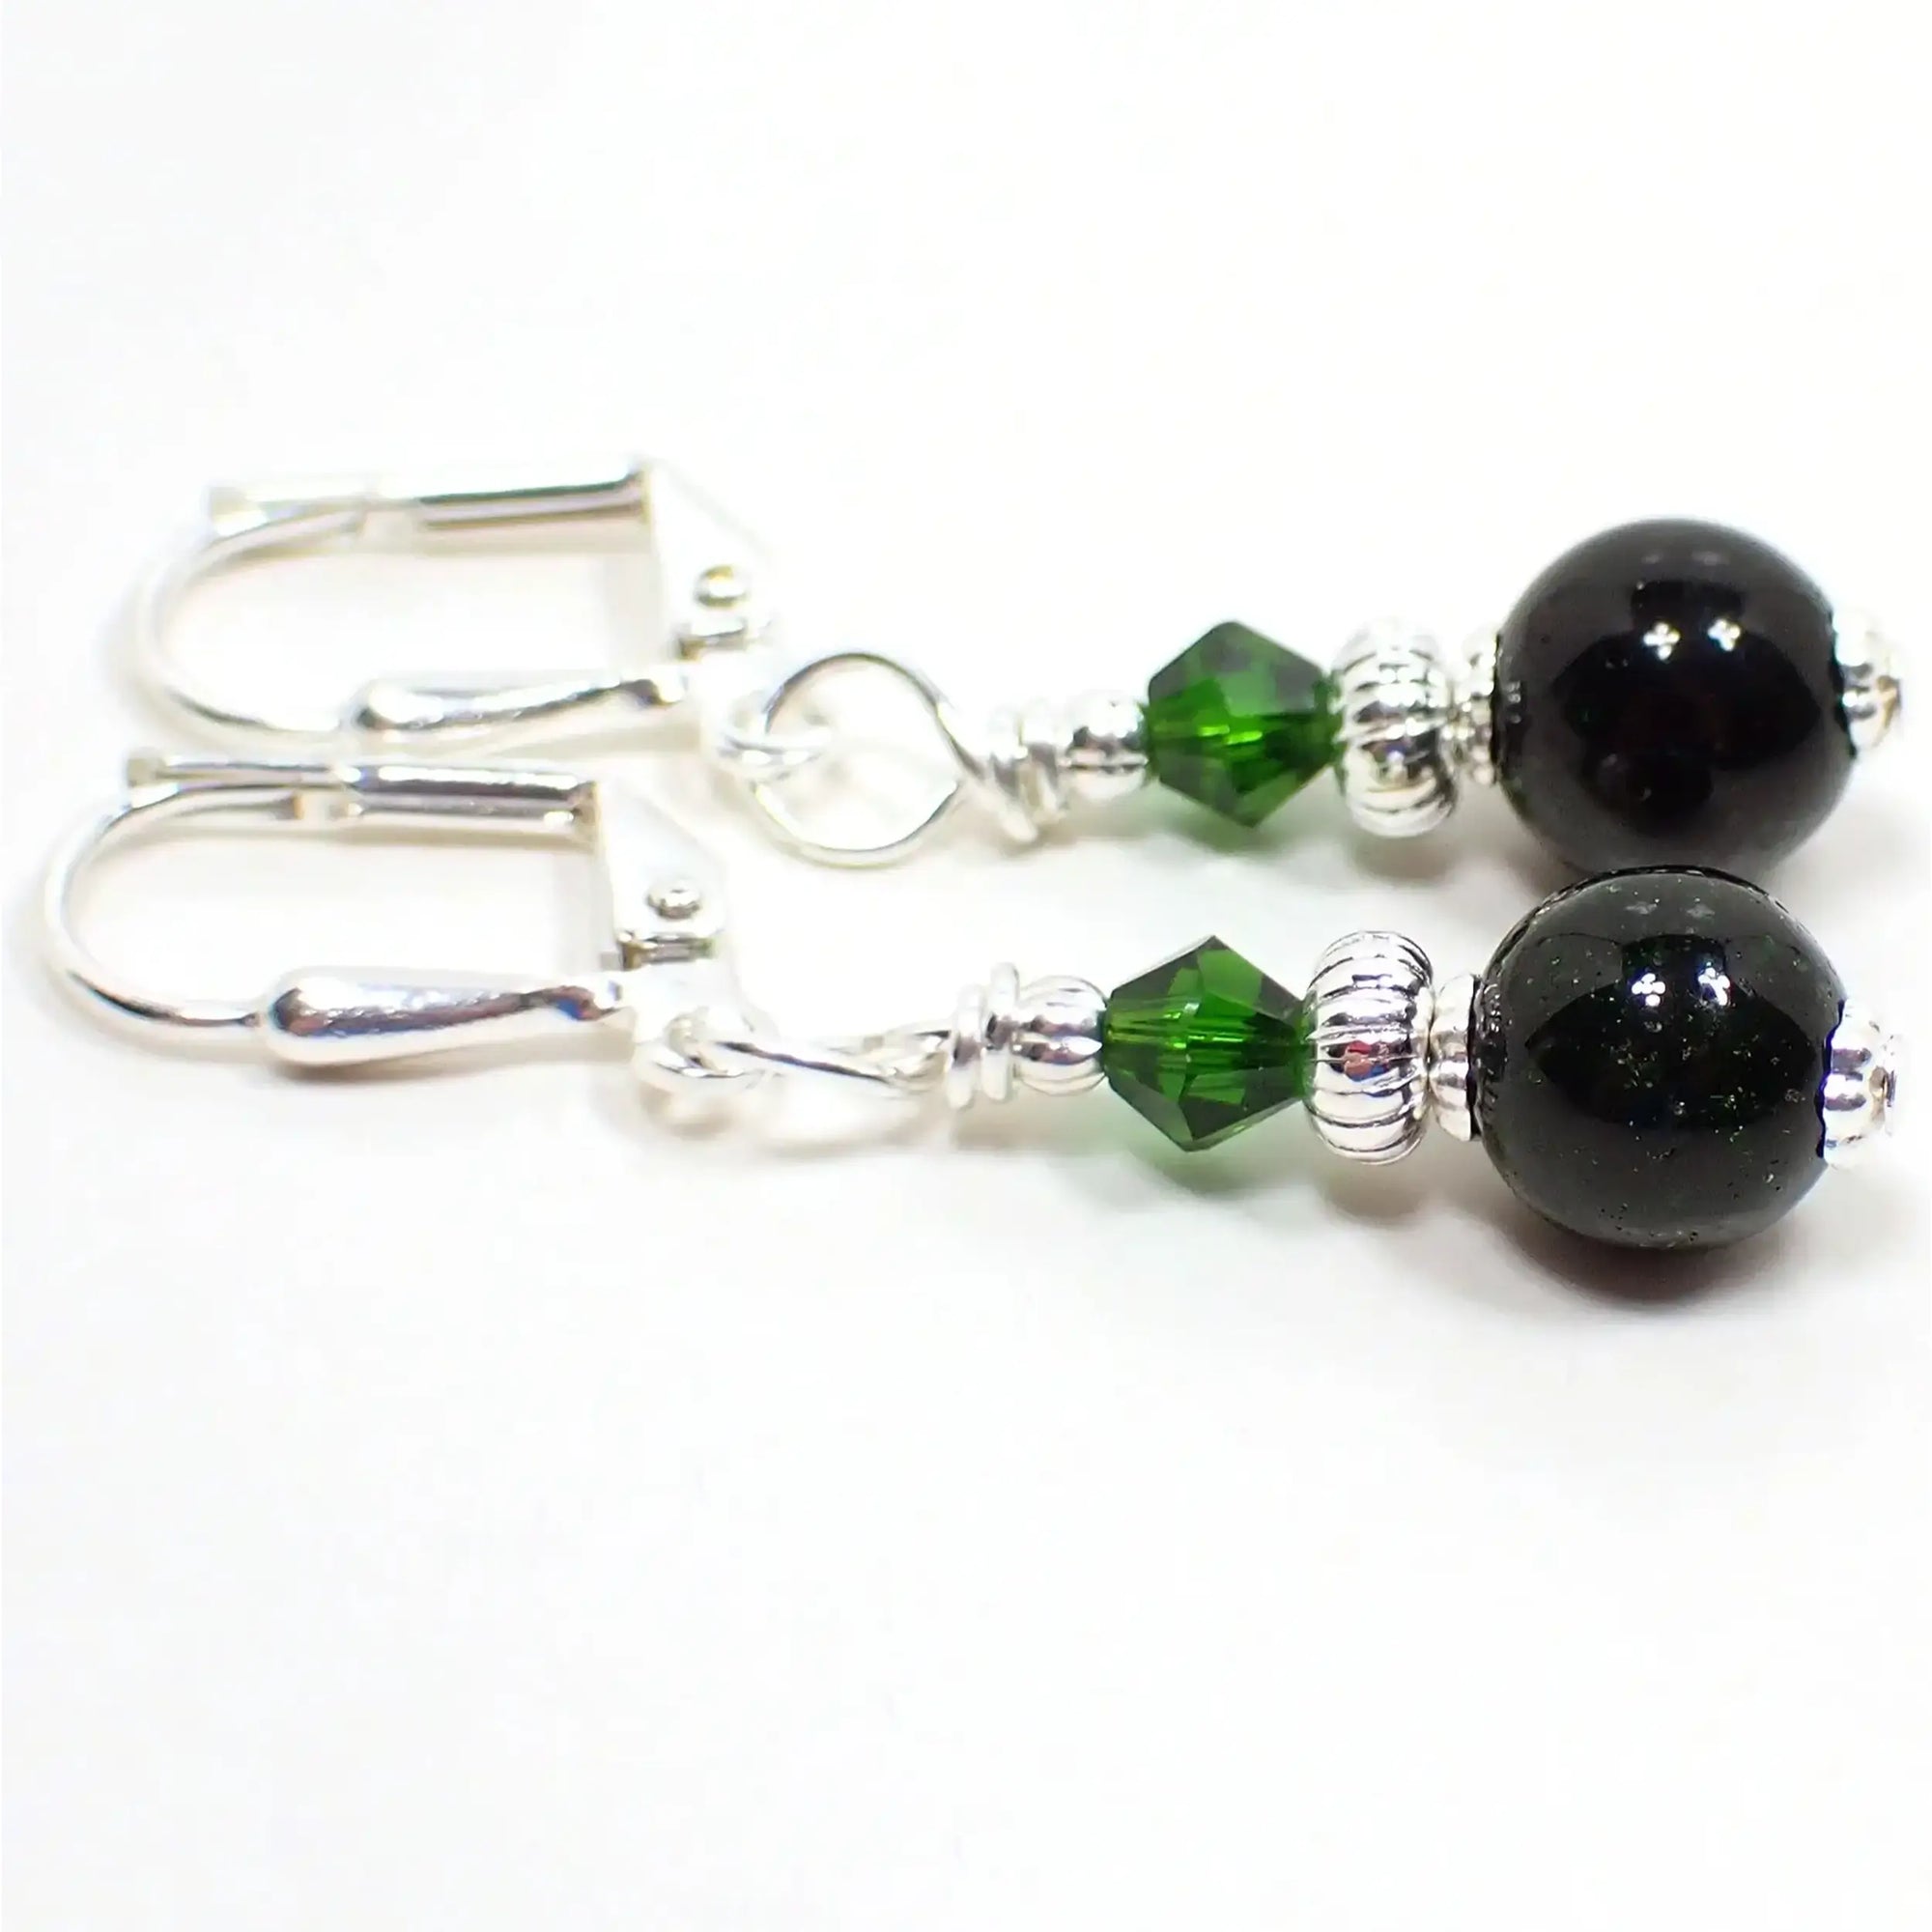 Side view of the small handmade green goldstone earrings. The metal is silver plated in color. There are small faceted green glass crystal beads at the top. The bottom beads are round sphere shaped and are dark green in color with tiny flecks of metallic green for sparkle.